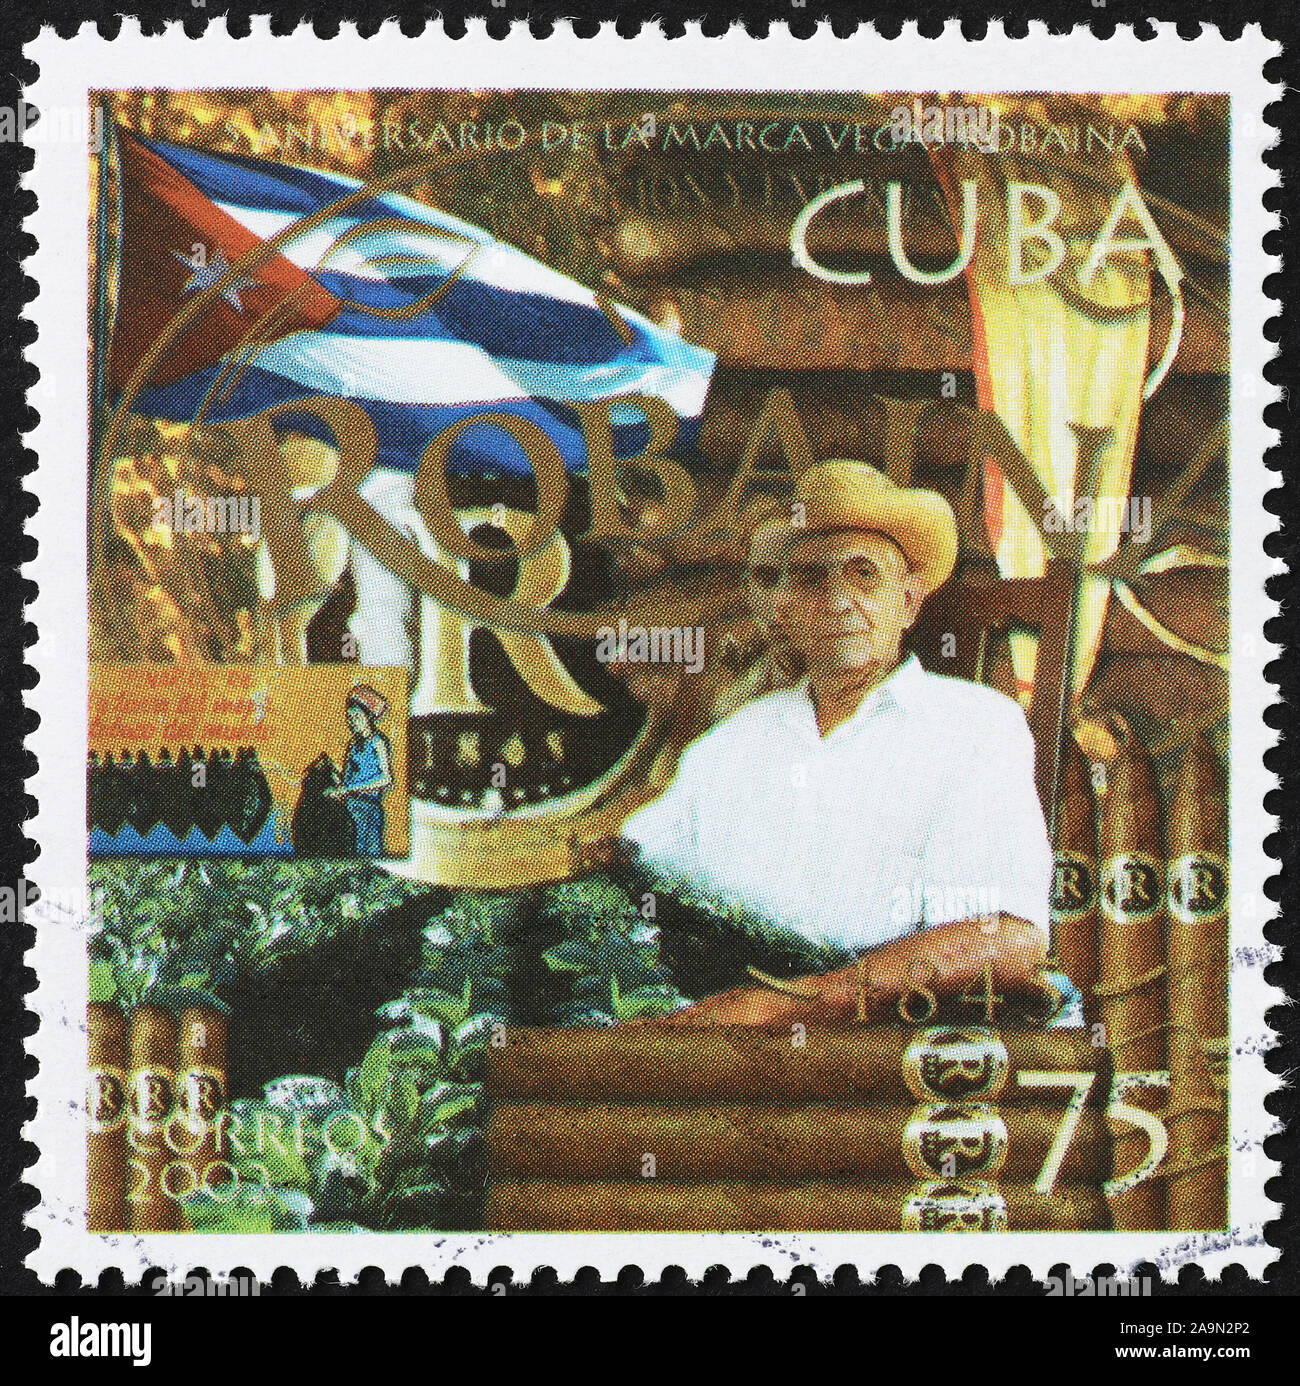 Brand of cuban cigars on postage stamp Stock Photo